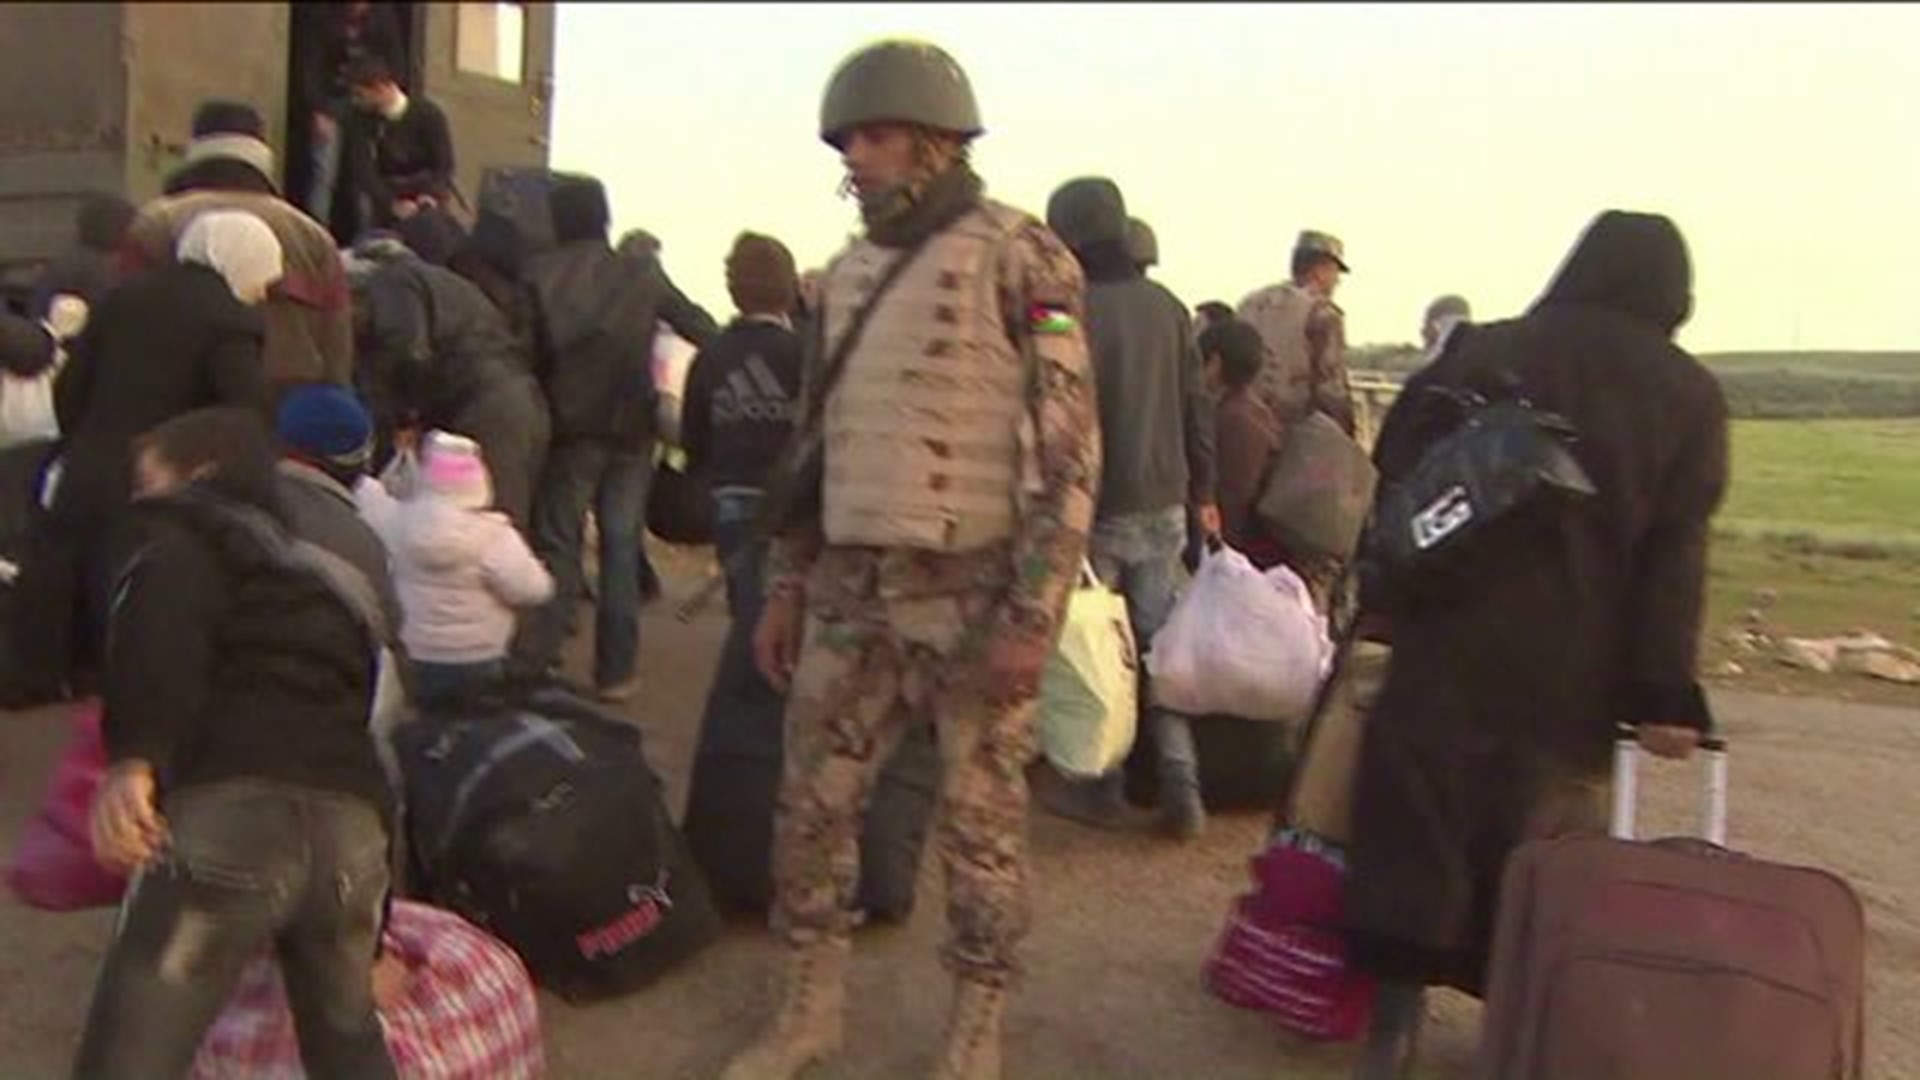 Should Syrian refugees be allowed to settle in Connecticut after Paris attacks?